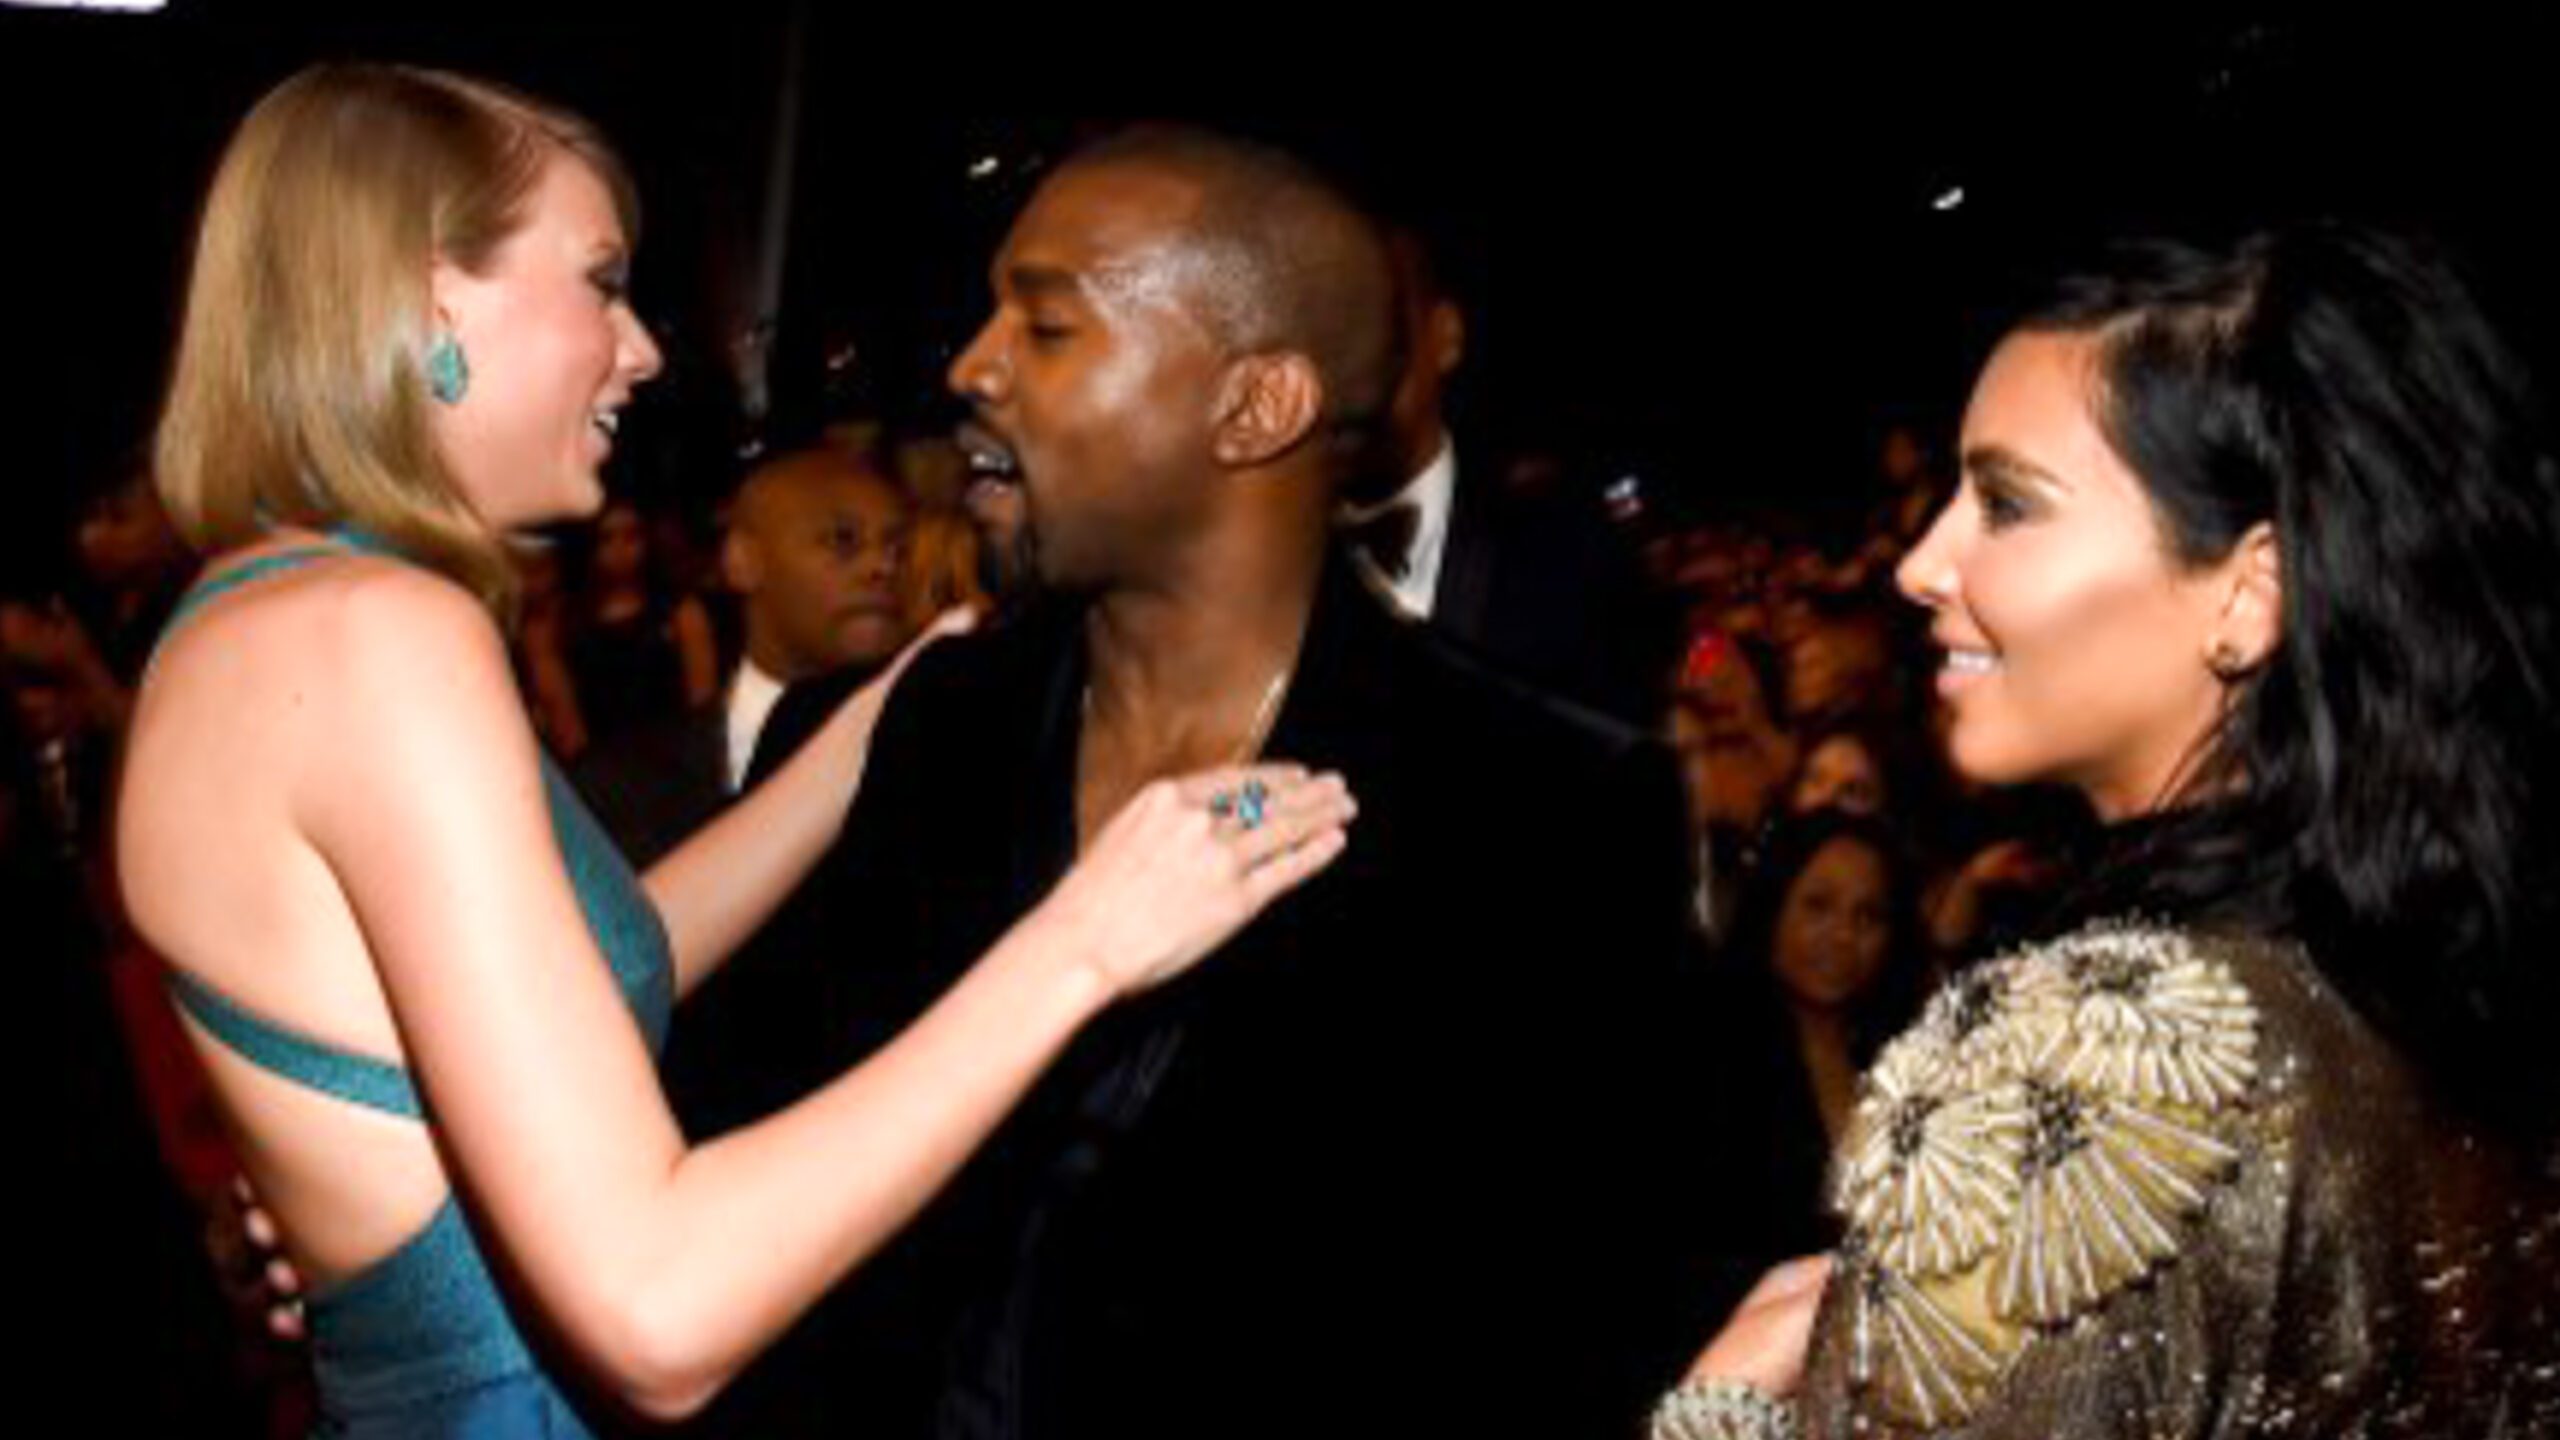 Can Taylor Swift sue Kim Kardashian, Kanye West for recording phone call?